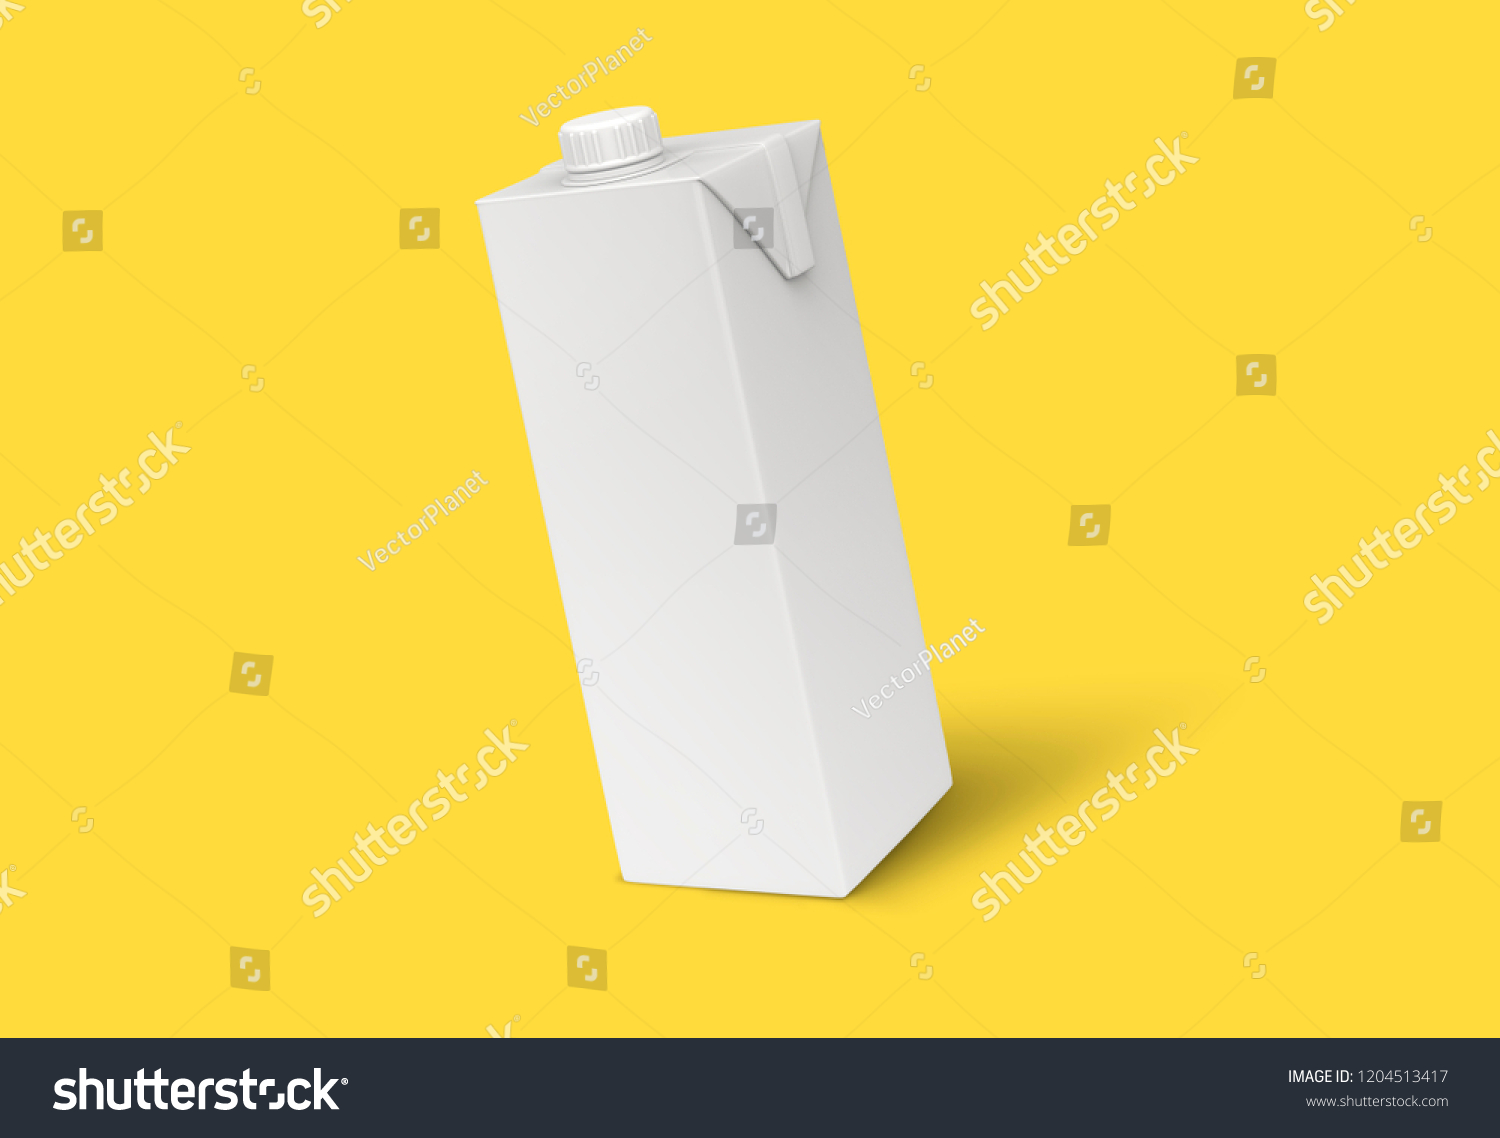 Download Milk Box On Yellow Background Stock Photo Edit Now 1204513417 PSD Mockup Templates